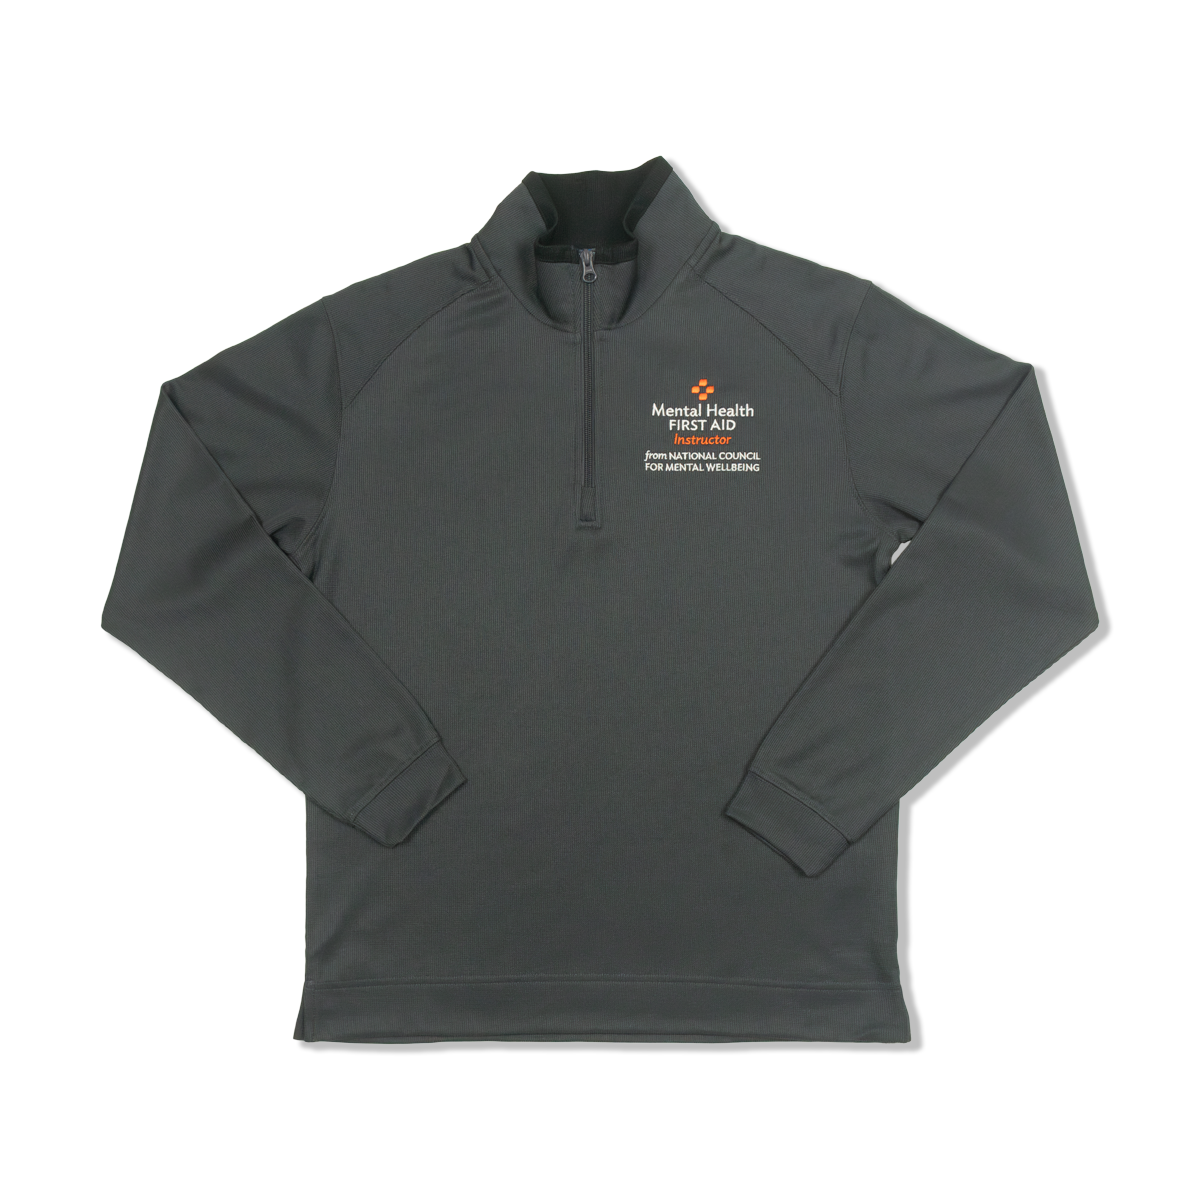 Mental Health First Aid Instructor Quarter-Zip Pullover